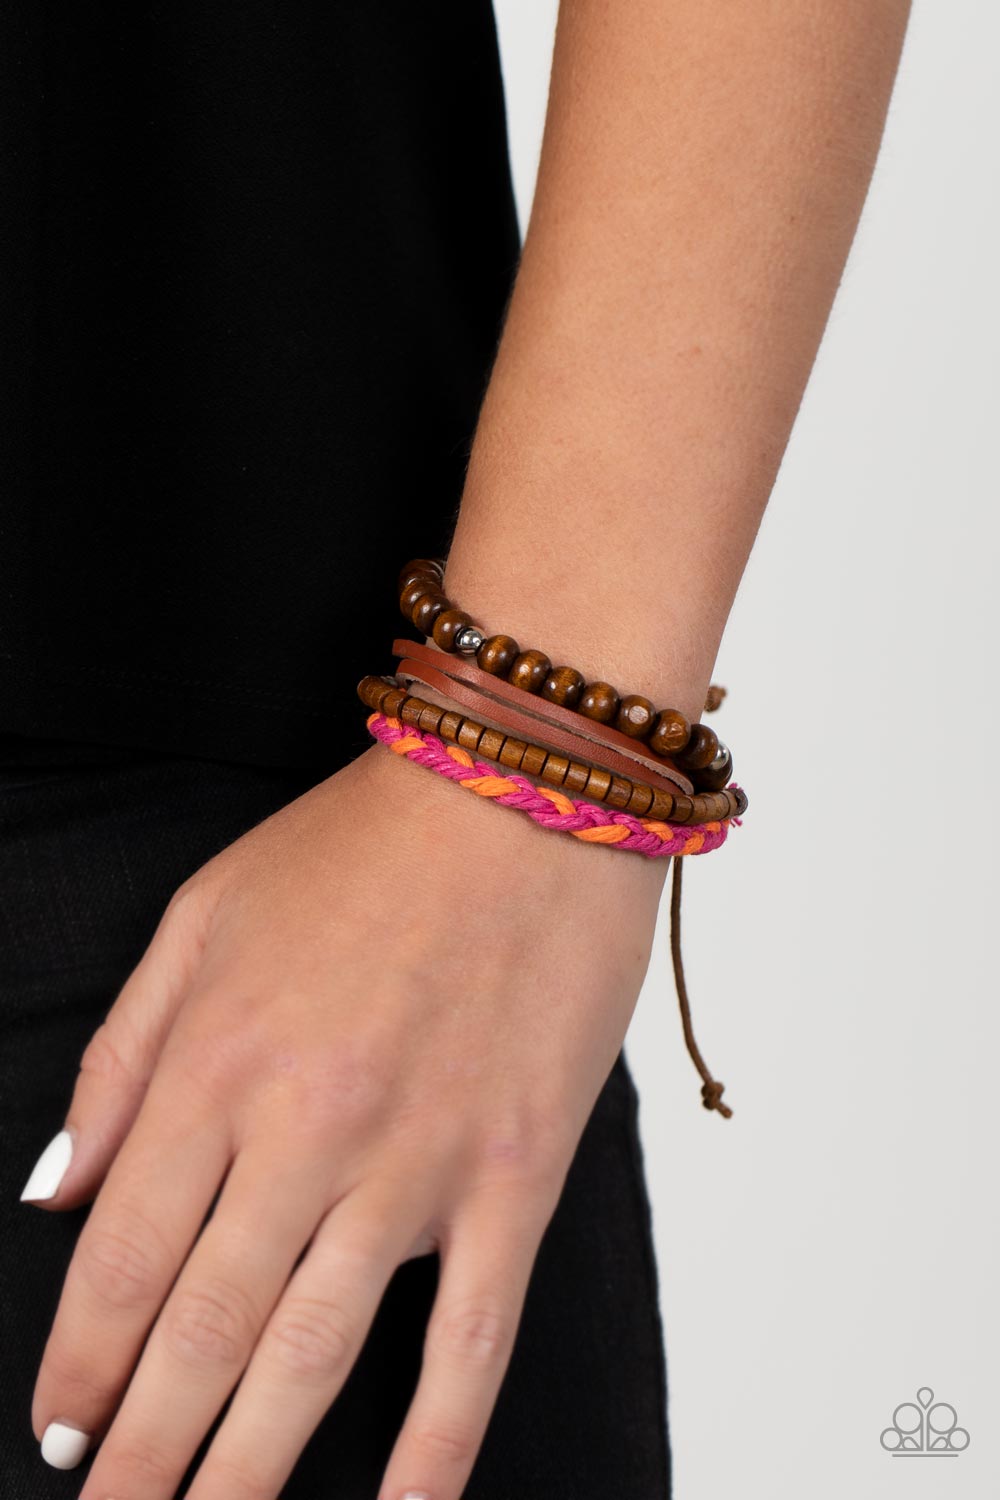 Timberland Trendsetter Pink and Brown Urban Bracelet - Paparazzi Accessories-on model - CarasShop.com - $5 Jewelry by Cara Jewels